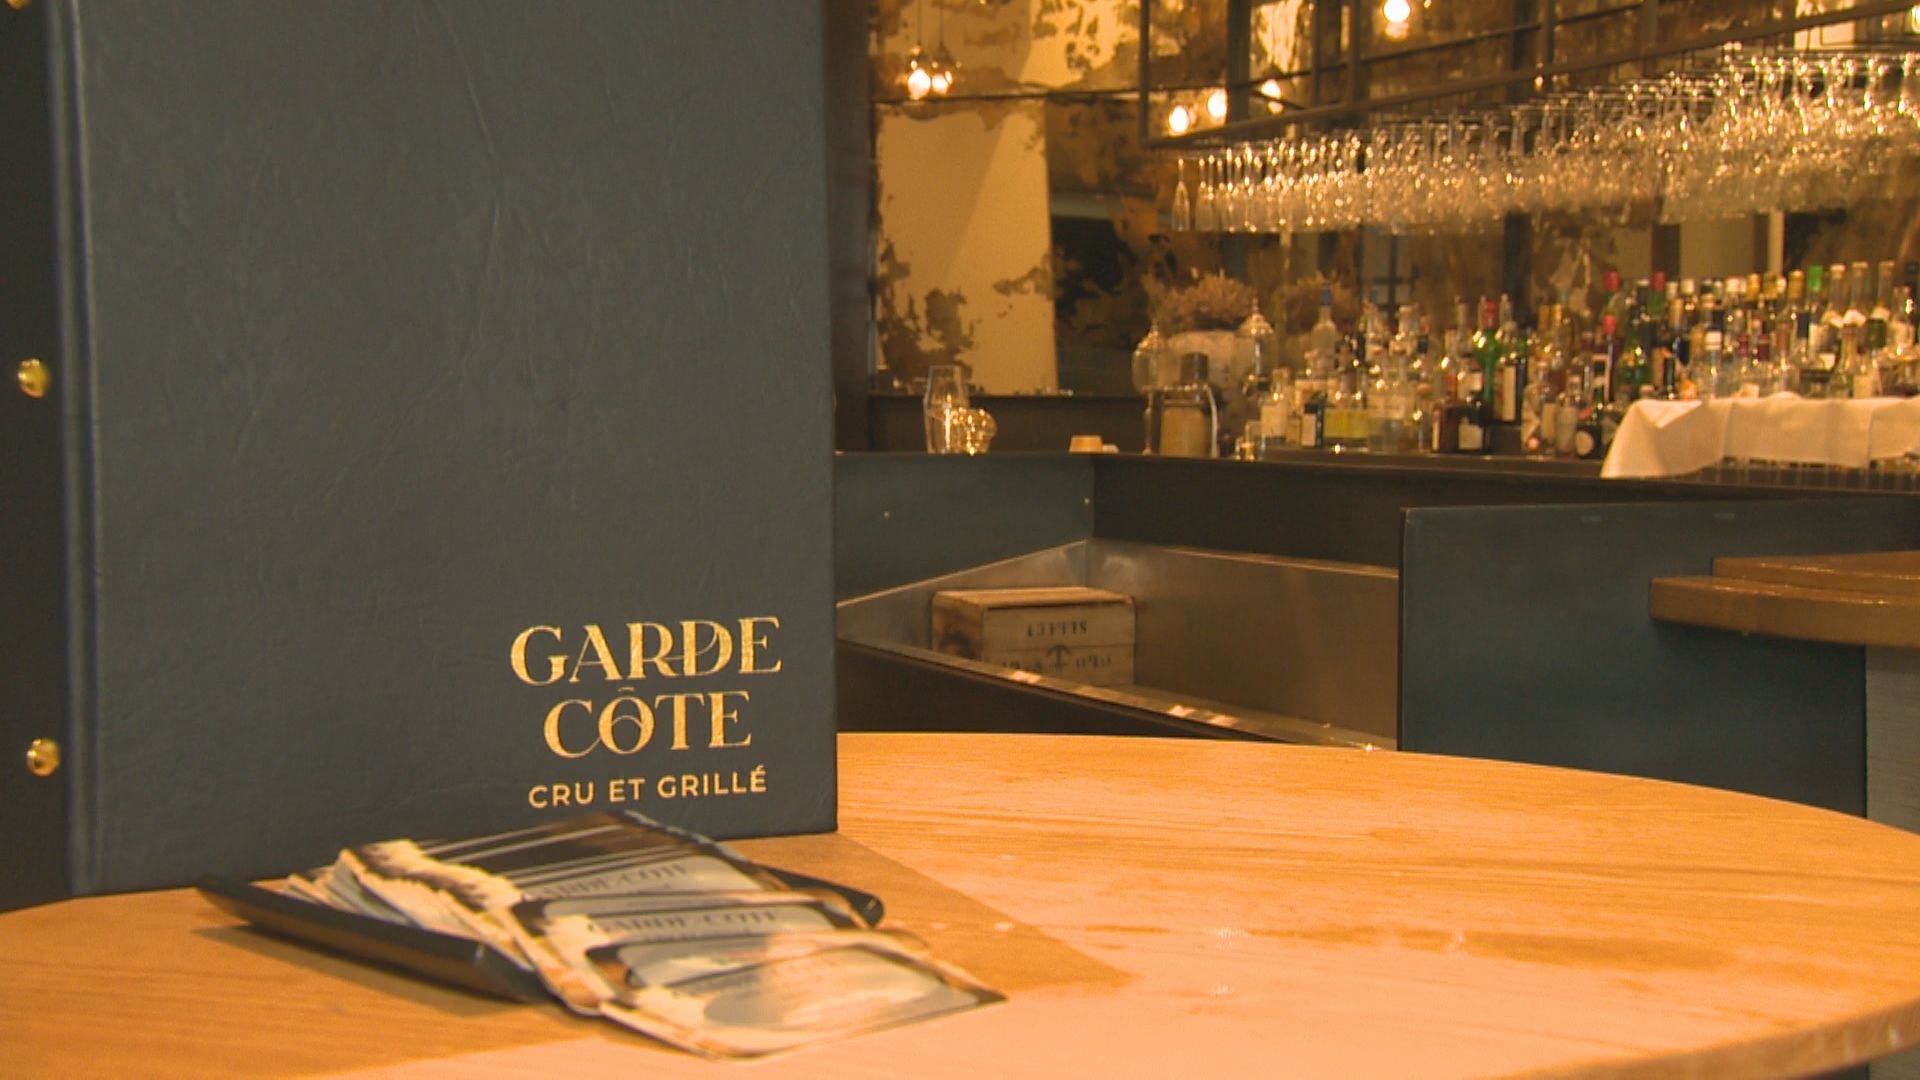 ‘Not sustainable’: restaurateurs reeling over last-minute cancellations